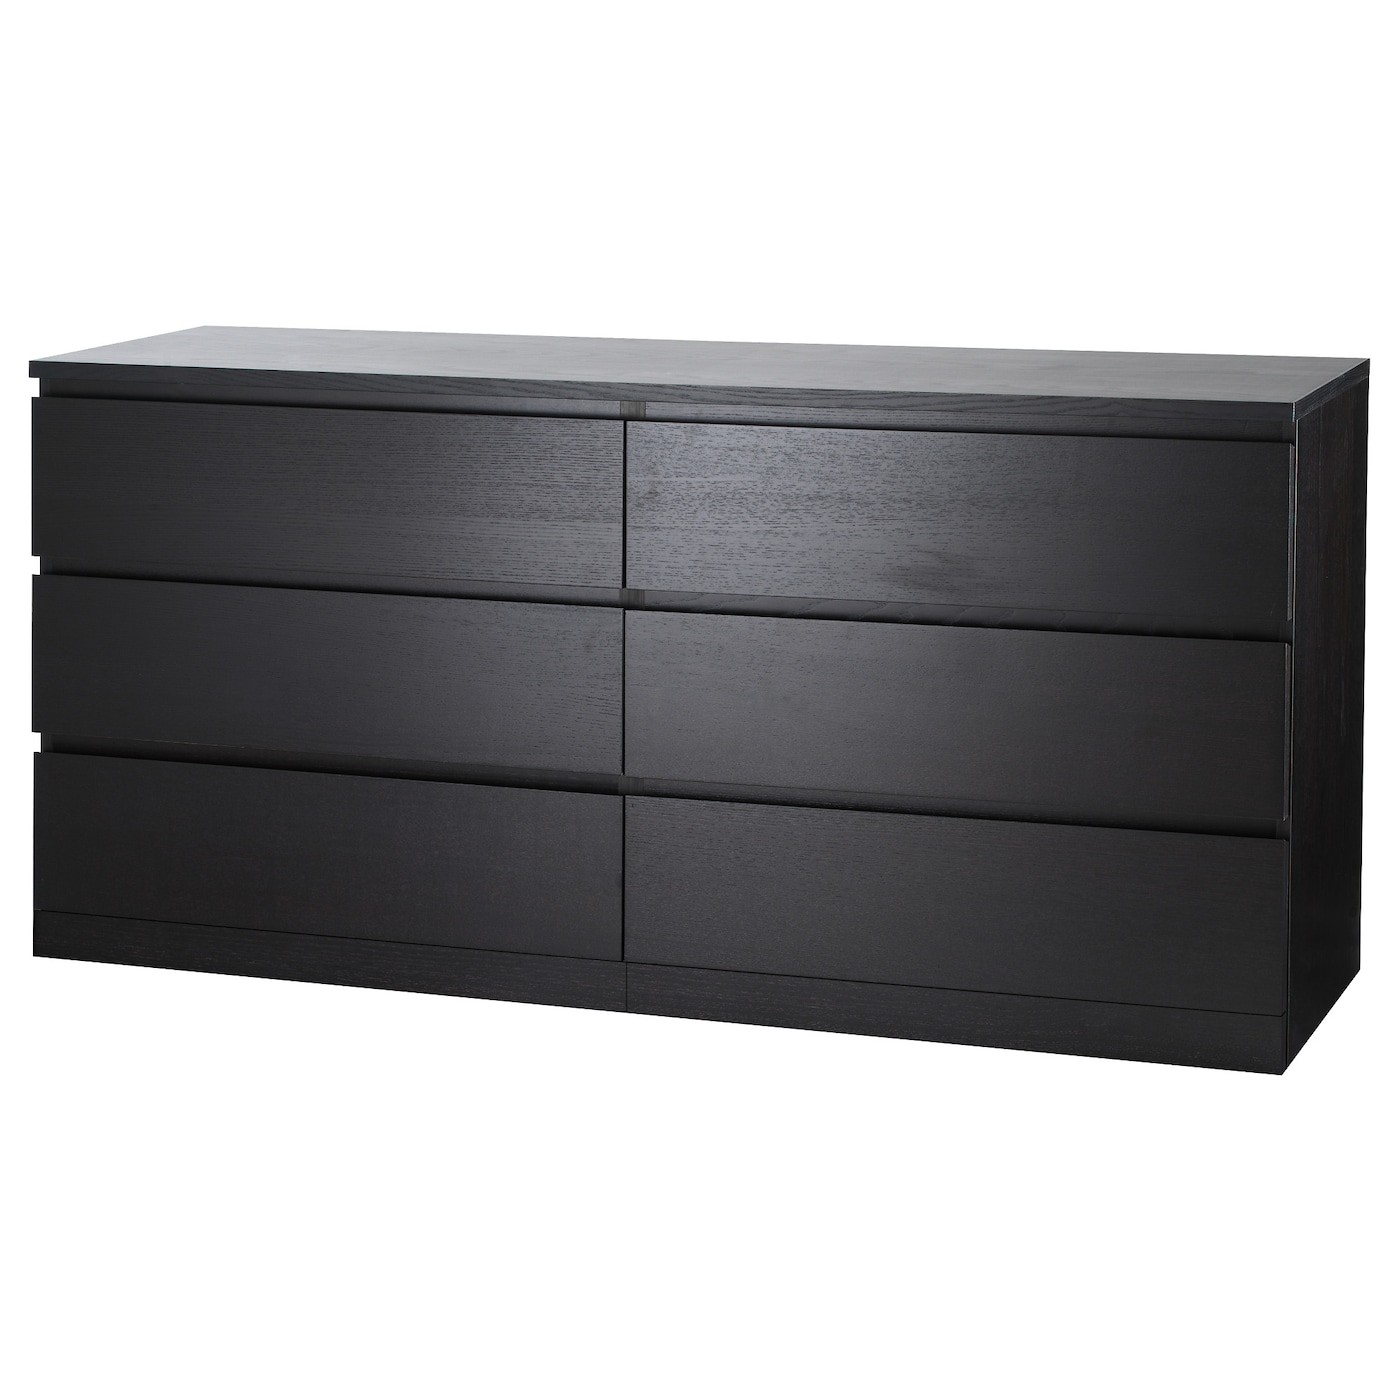 MALM Chest of 6 drawers